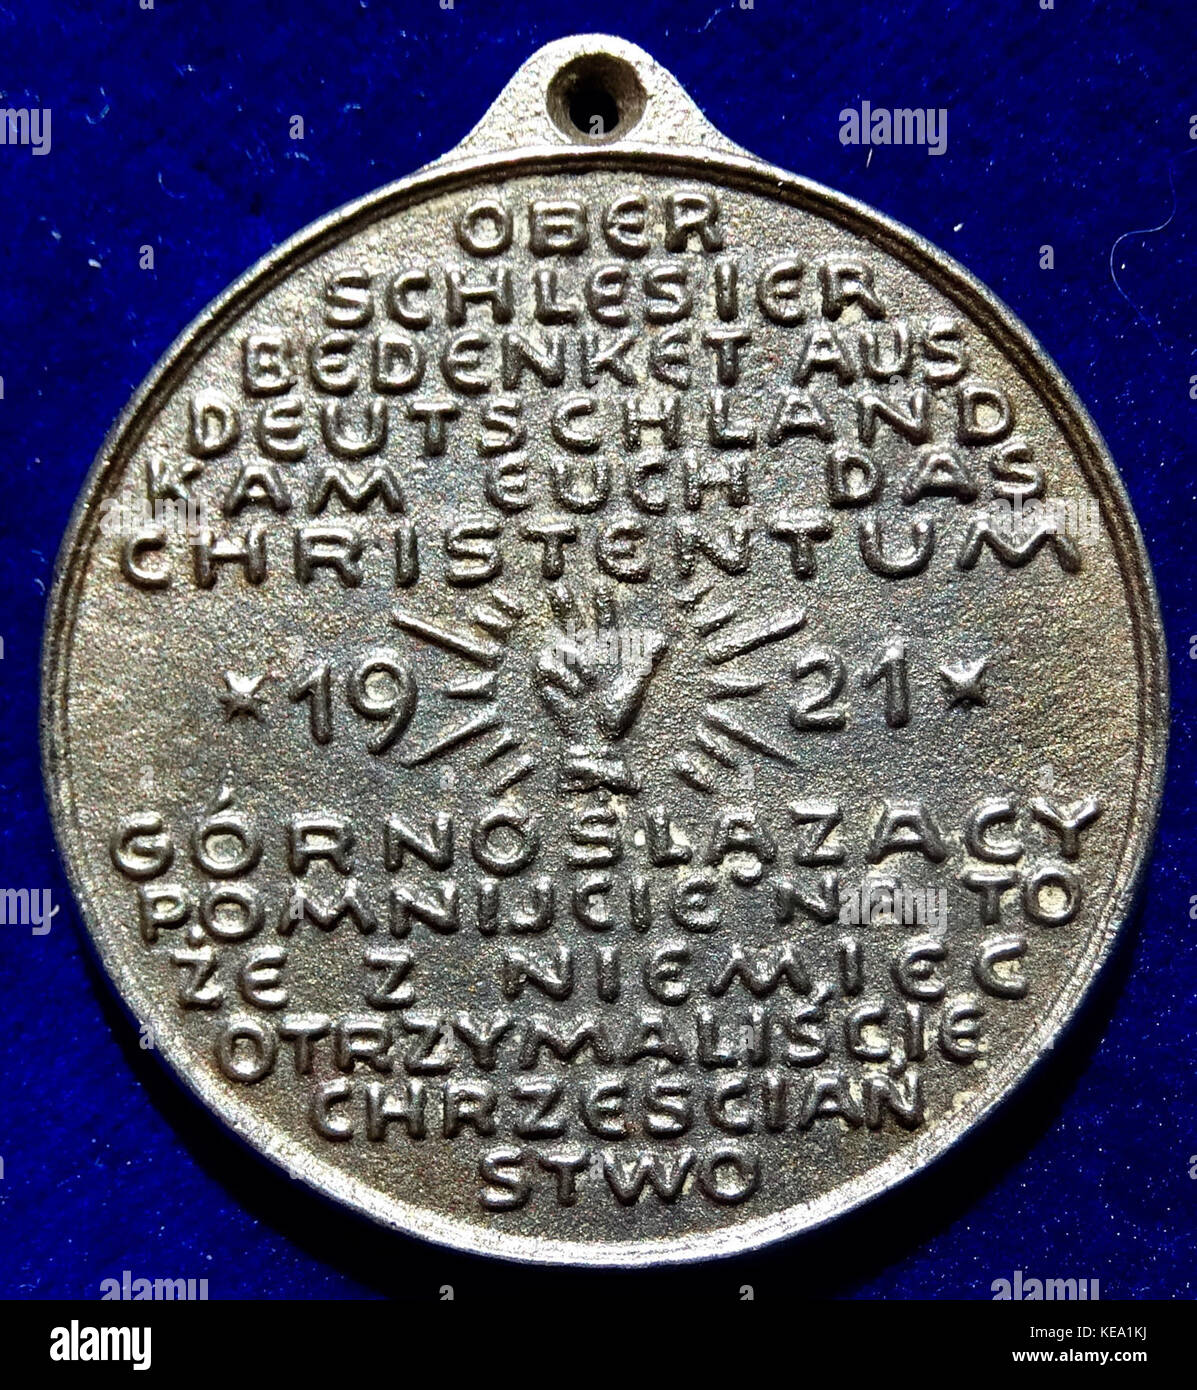 Upper Silesia Plebiscite 1921 Fe  Campaign Medal of the pro  German Side (reverse) Stock Photo